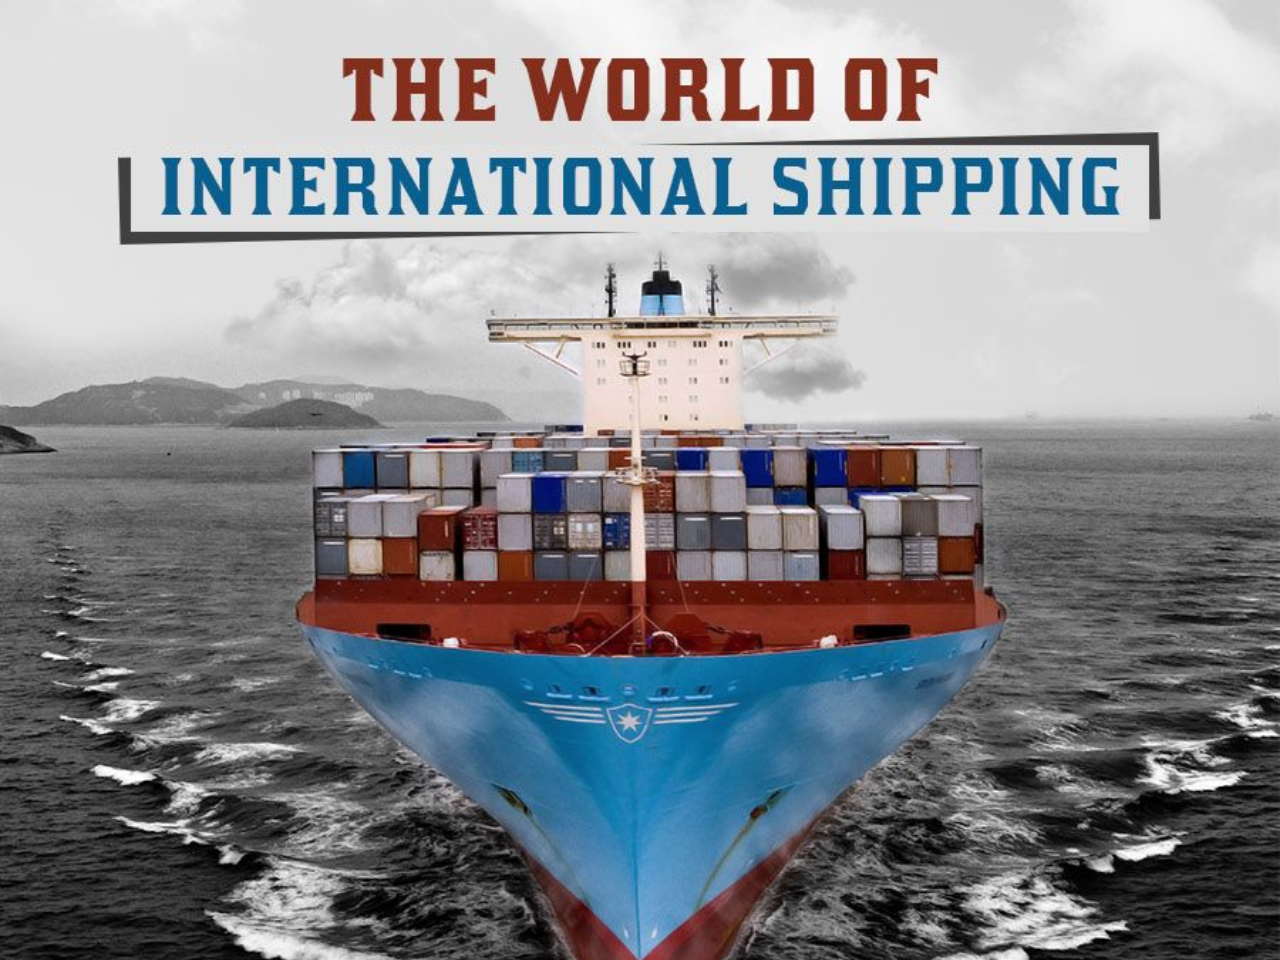 International Shipping Process And Facts [InfoGraphic]